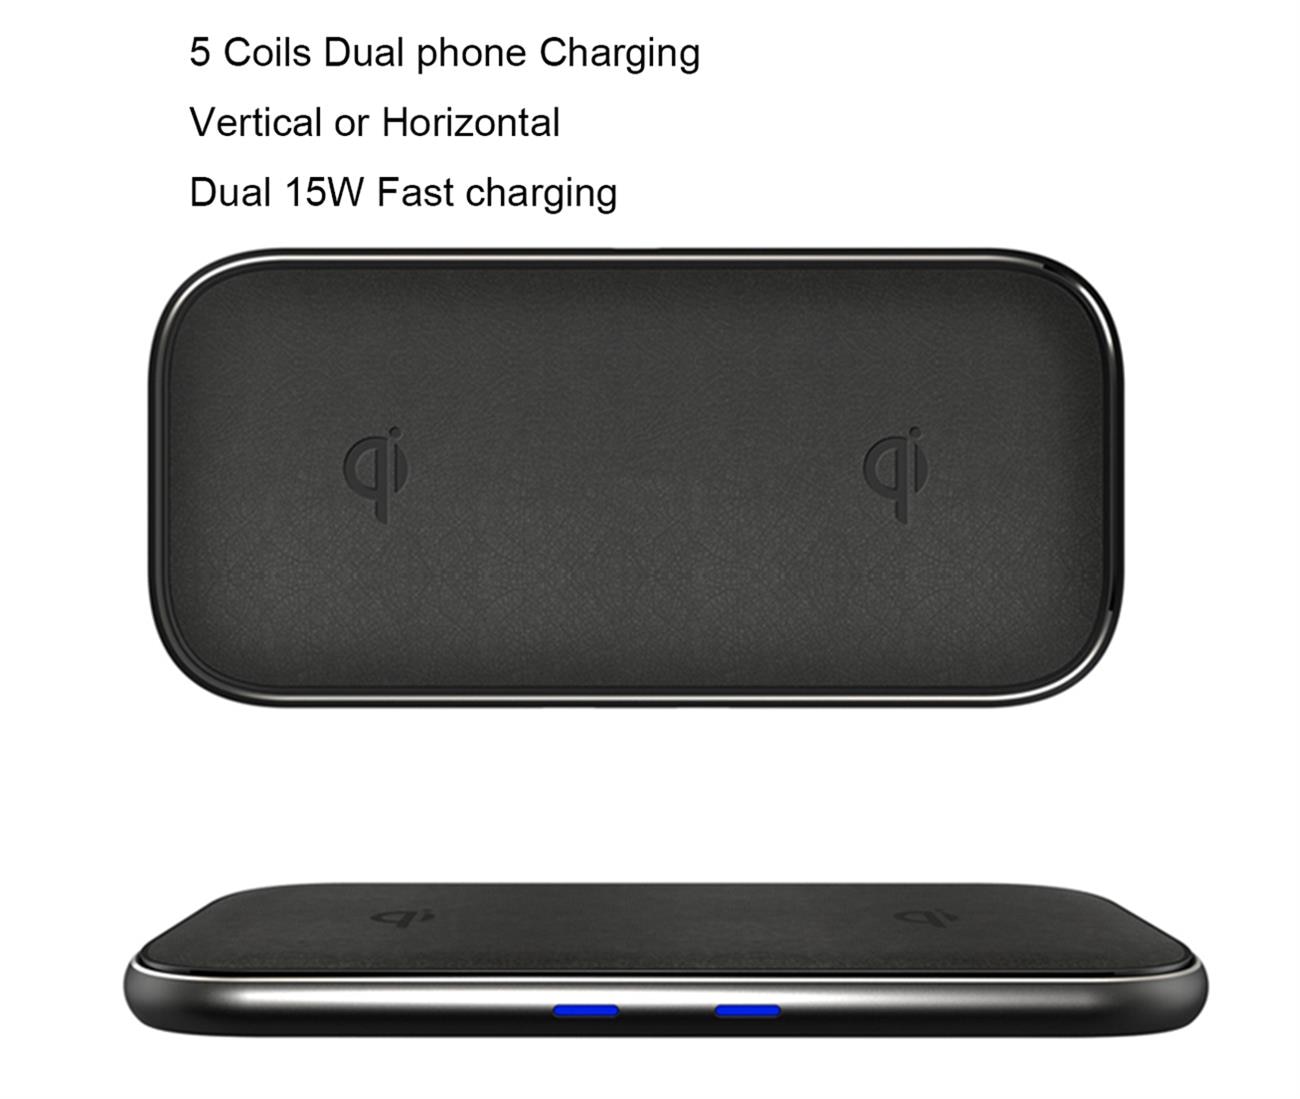 5 Coils Dual Wireless Charger For Smart Phone